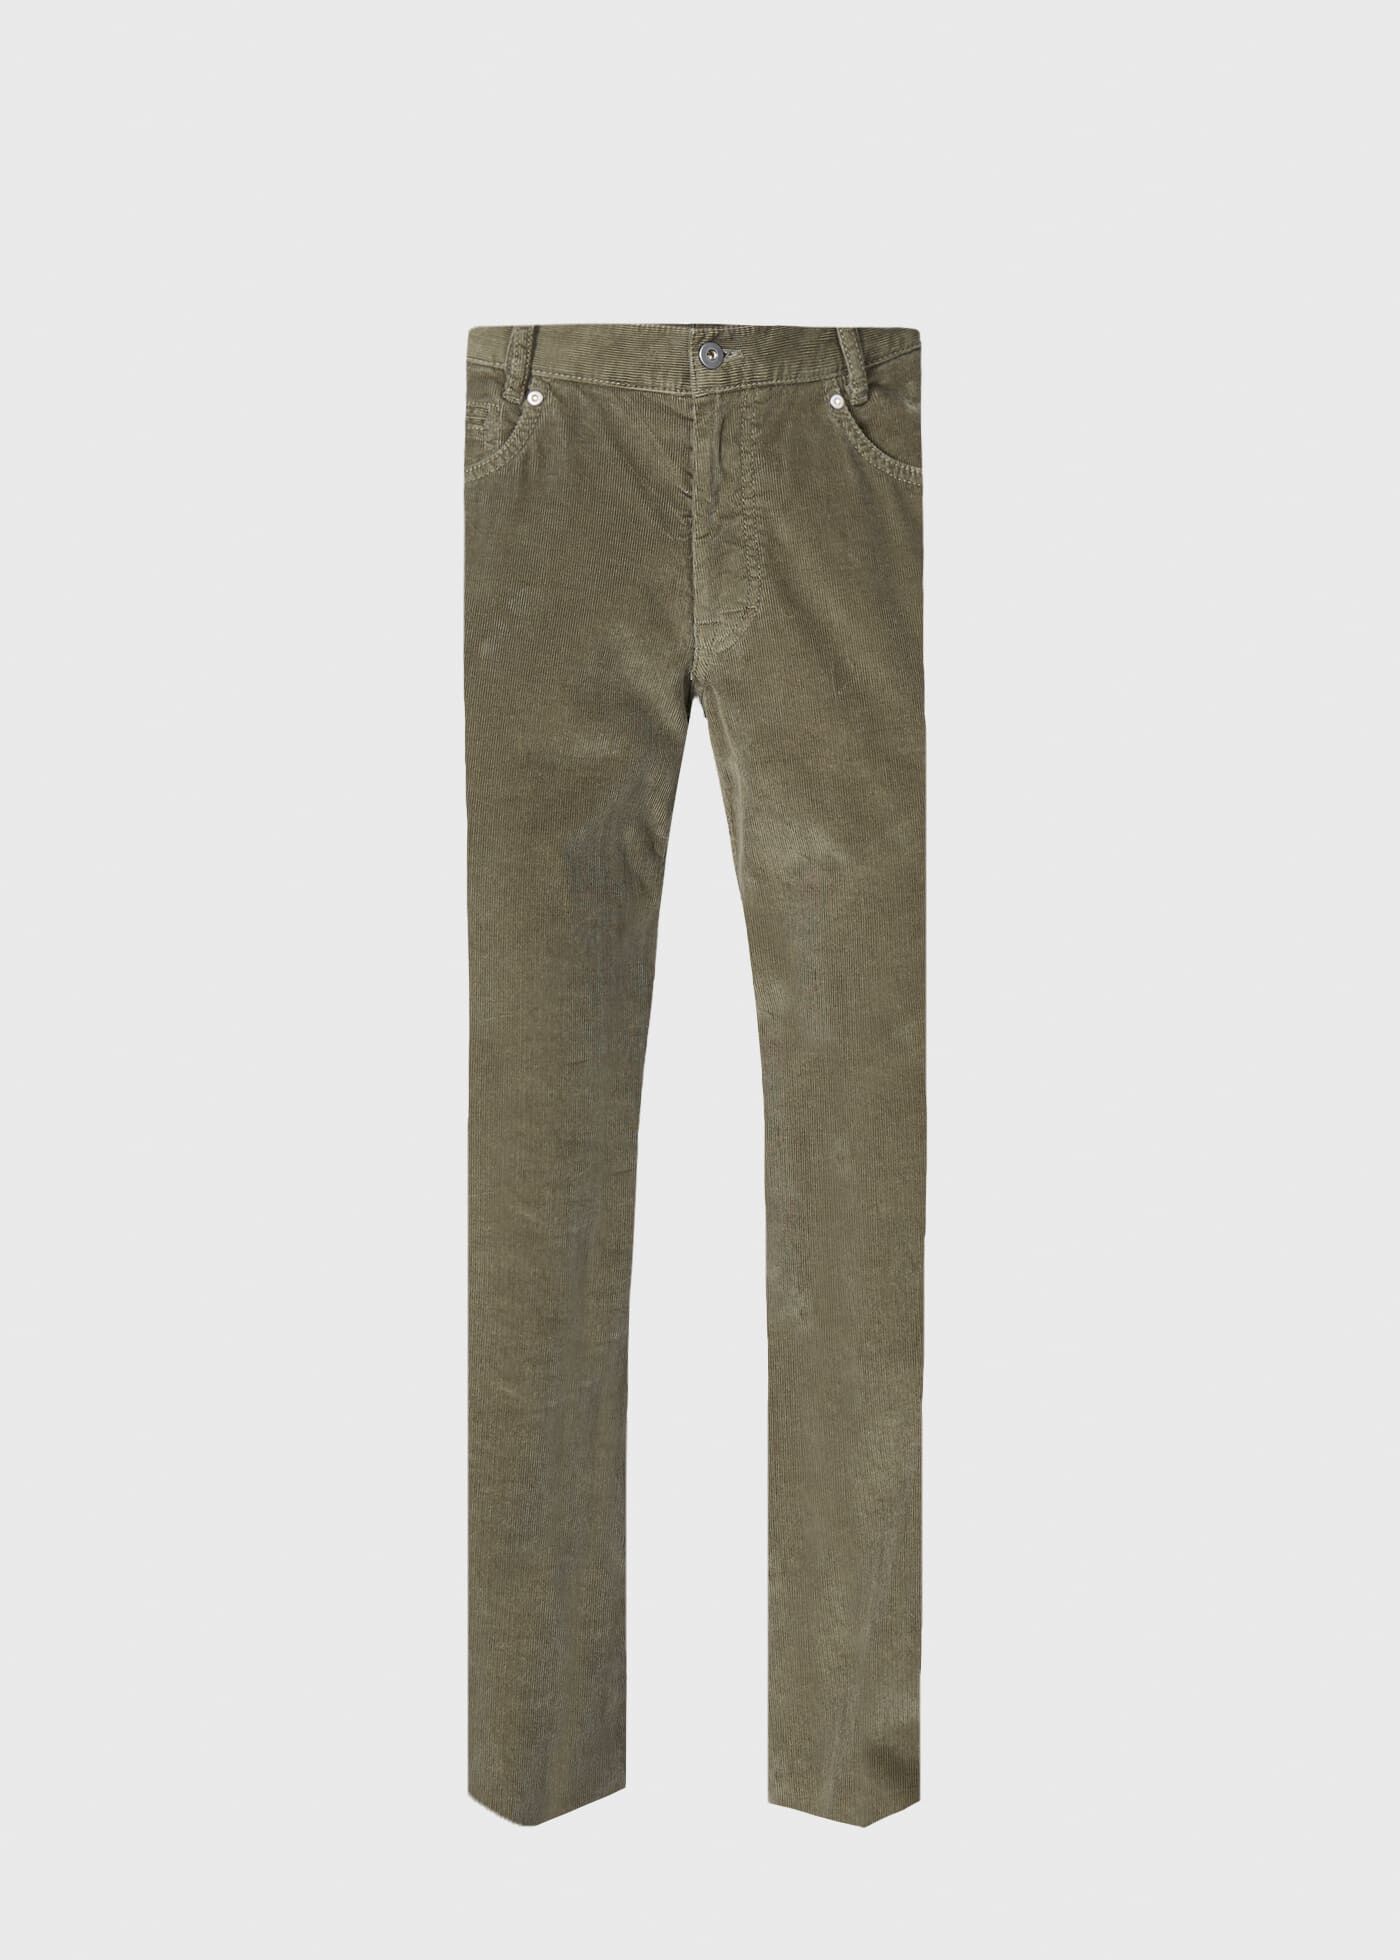 Stretch Corduroy 5 Pocket Pants for Tall Men | American Tall